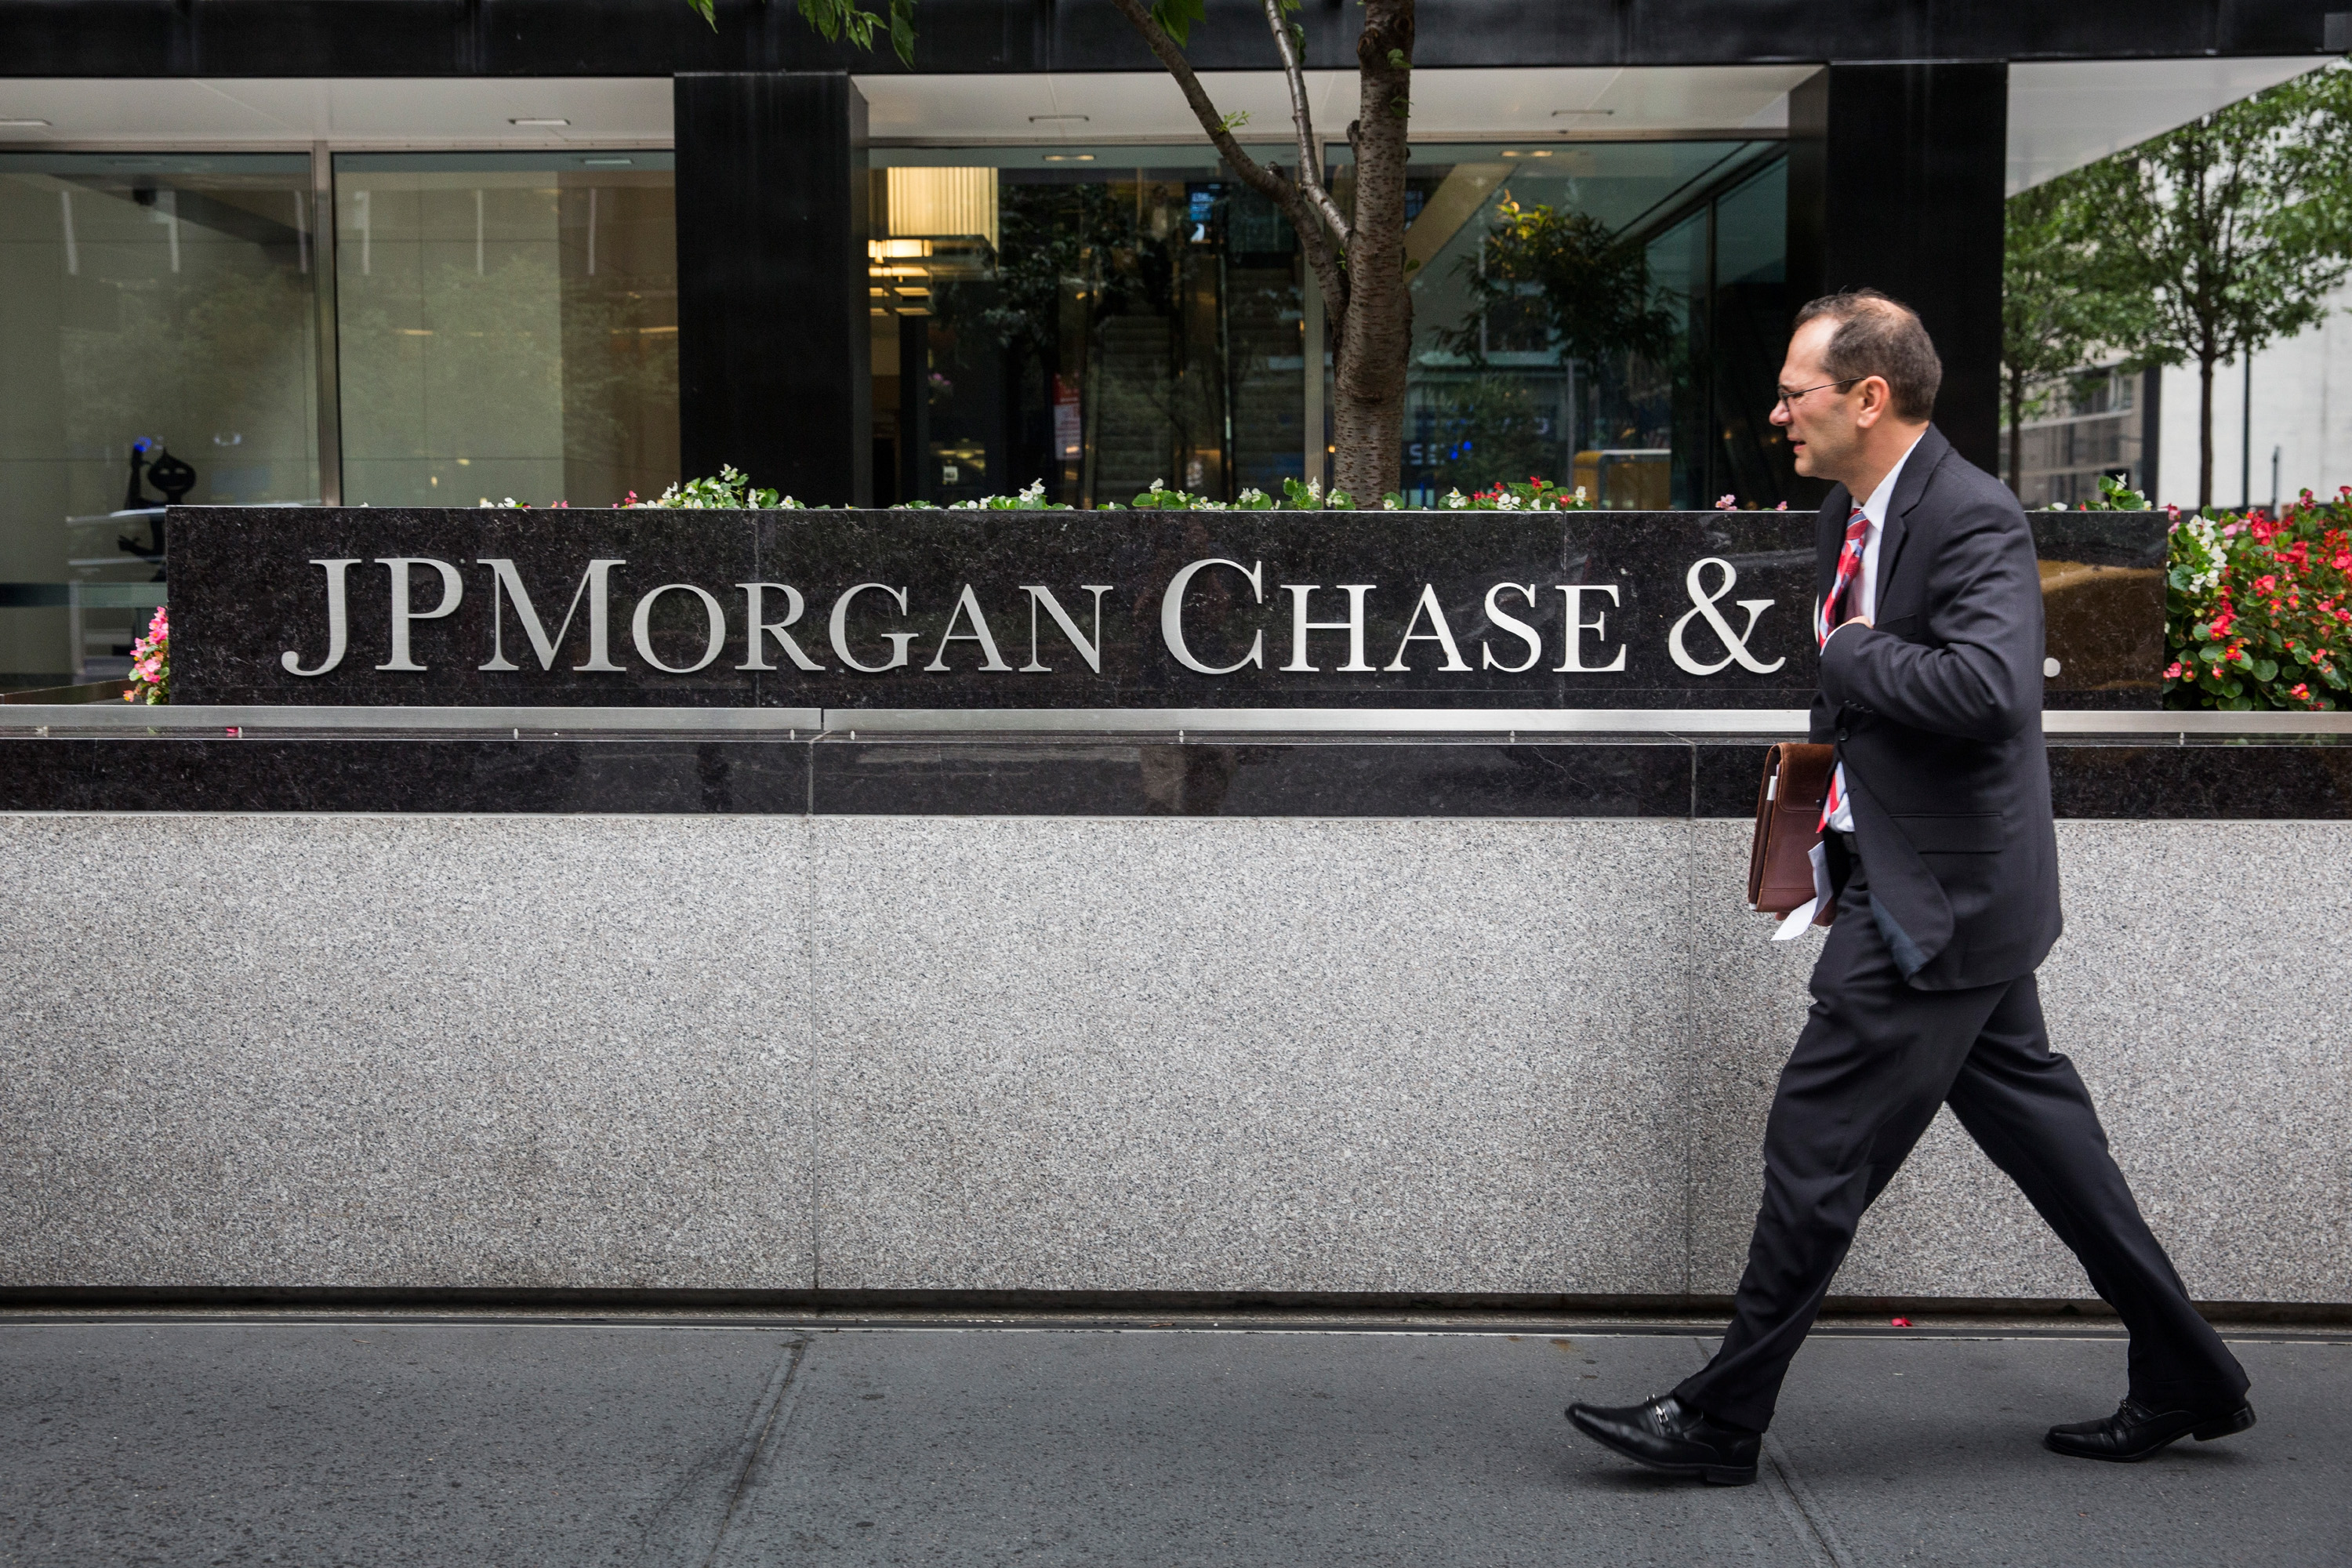 A man walks past JP Morgan Chase's corporate headquarters on August 12, 2014 in New York City. (Andrew Burton&mdash;Getty Images)